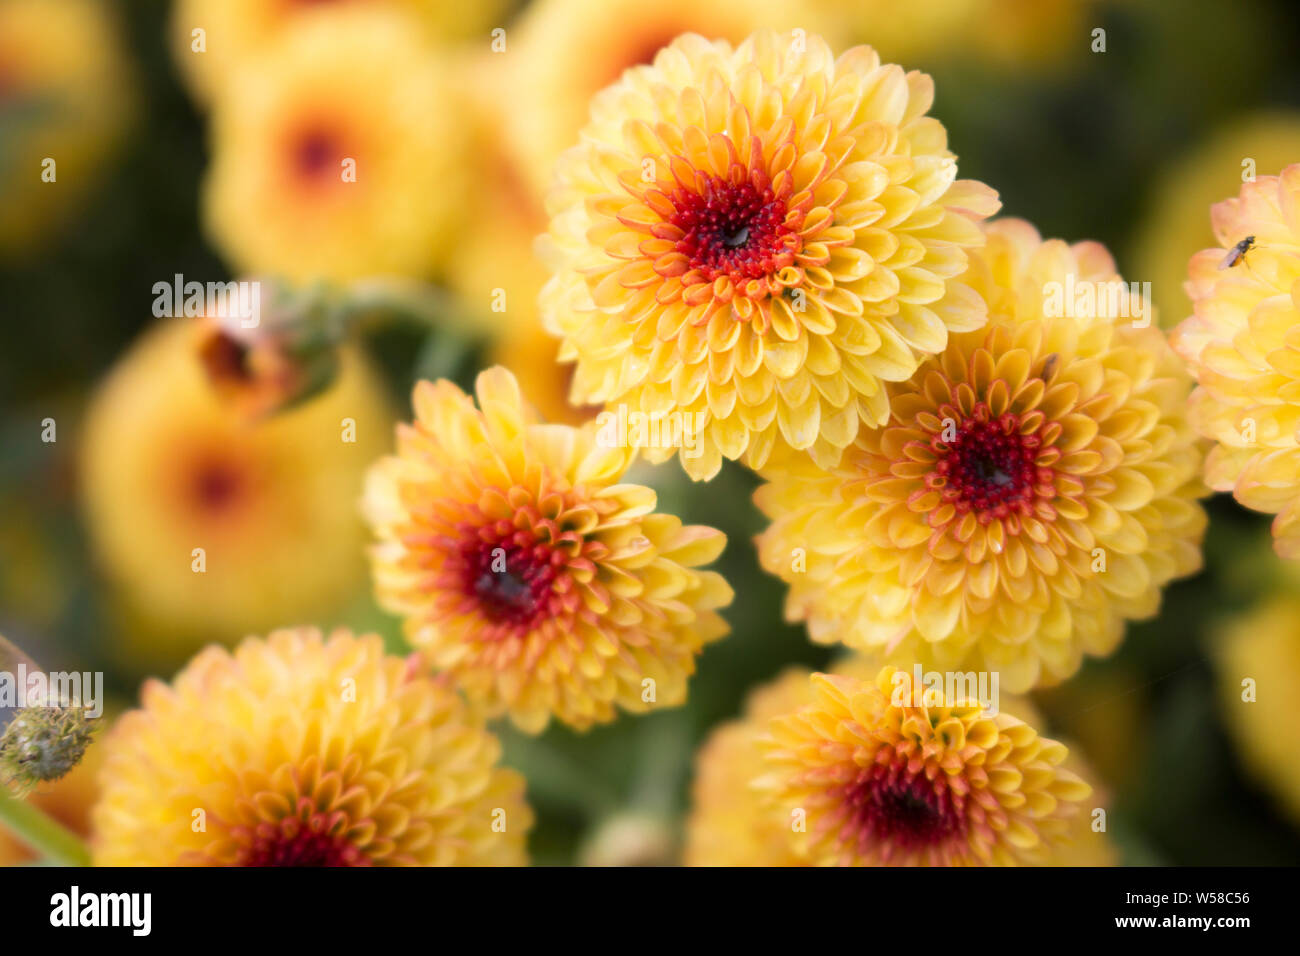 Blooming Lollipop Yellow Chrysanthemum flowers with water drops in center from morning dew. Blurry background. Stock Photo